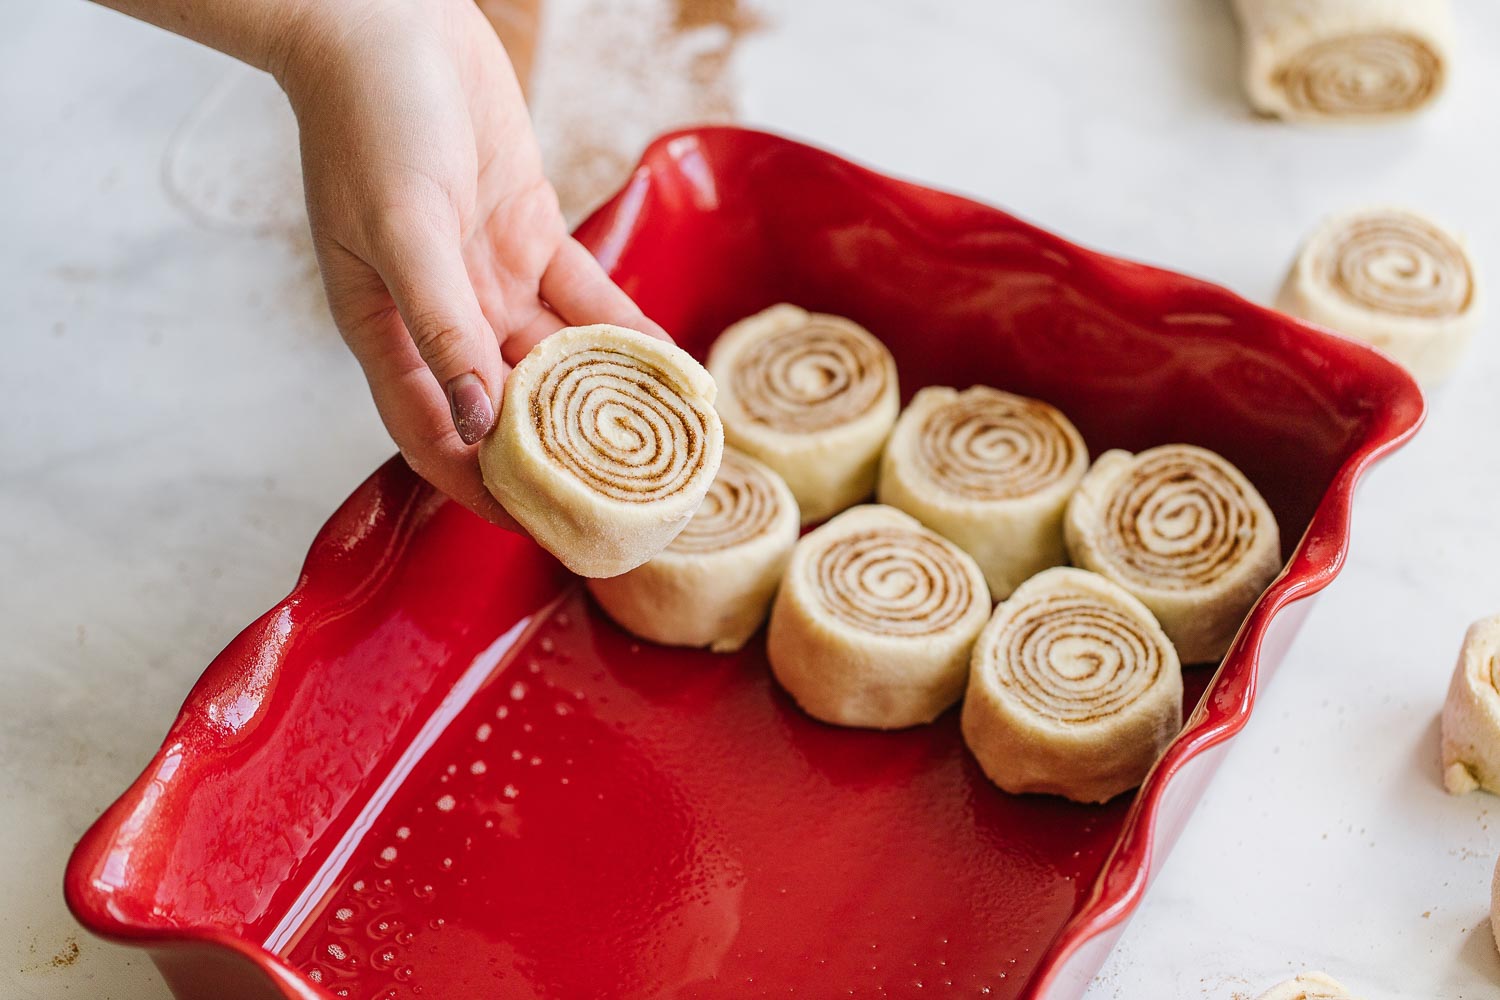 A hand placing raw cinnamon rolls into a red pan where there are 6 cinnamon rolls in the pan.